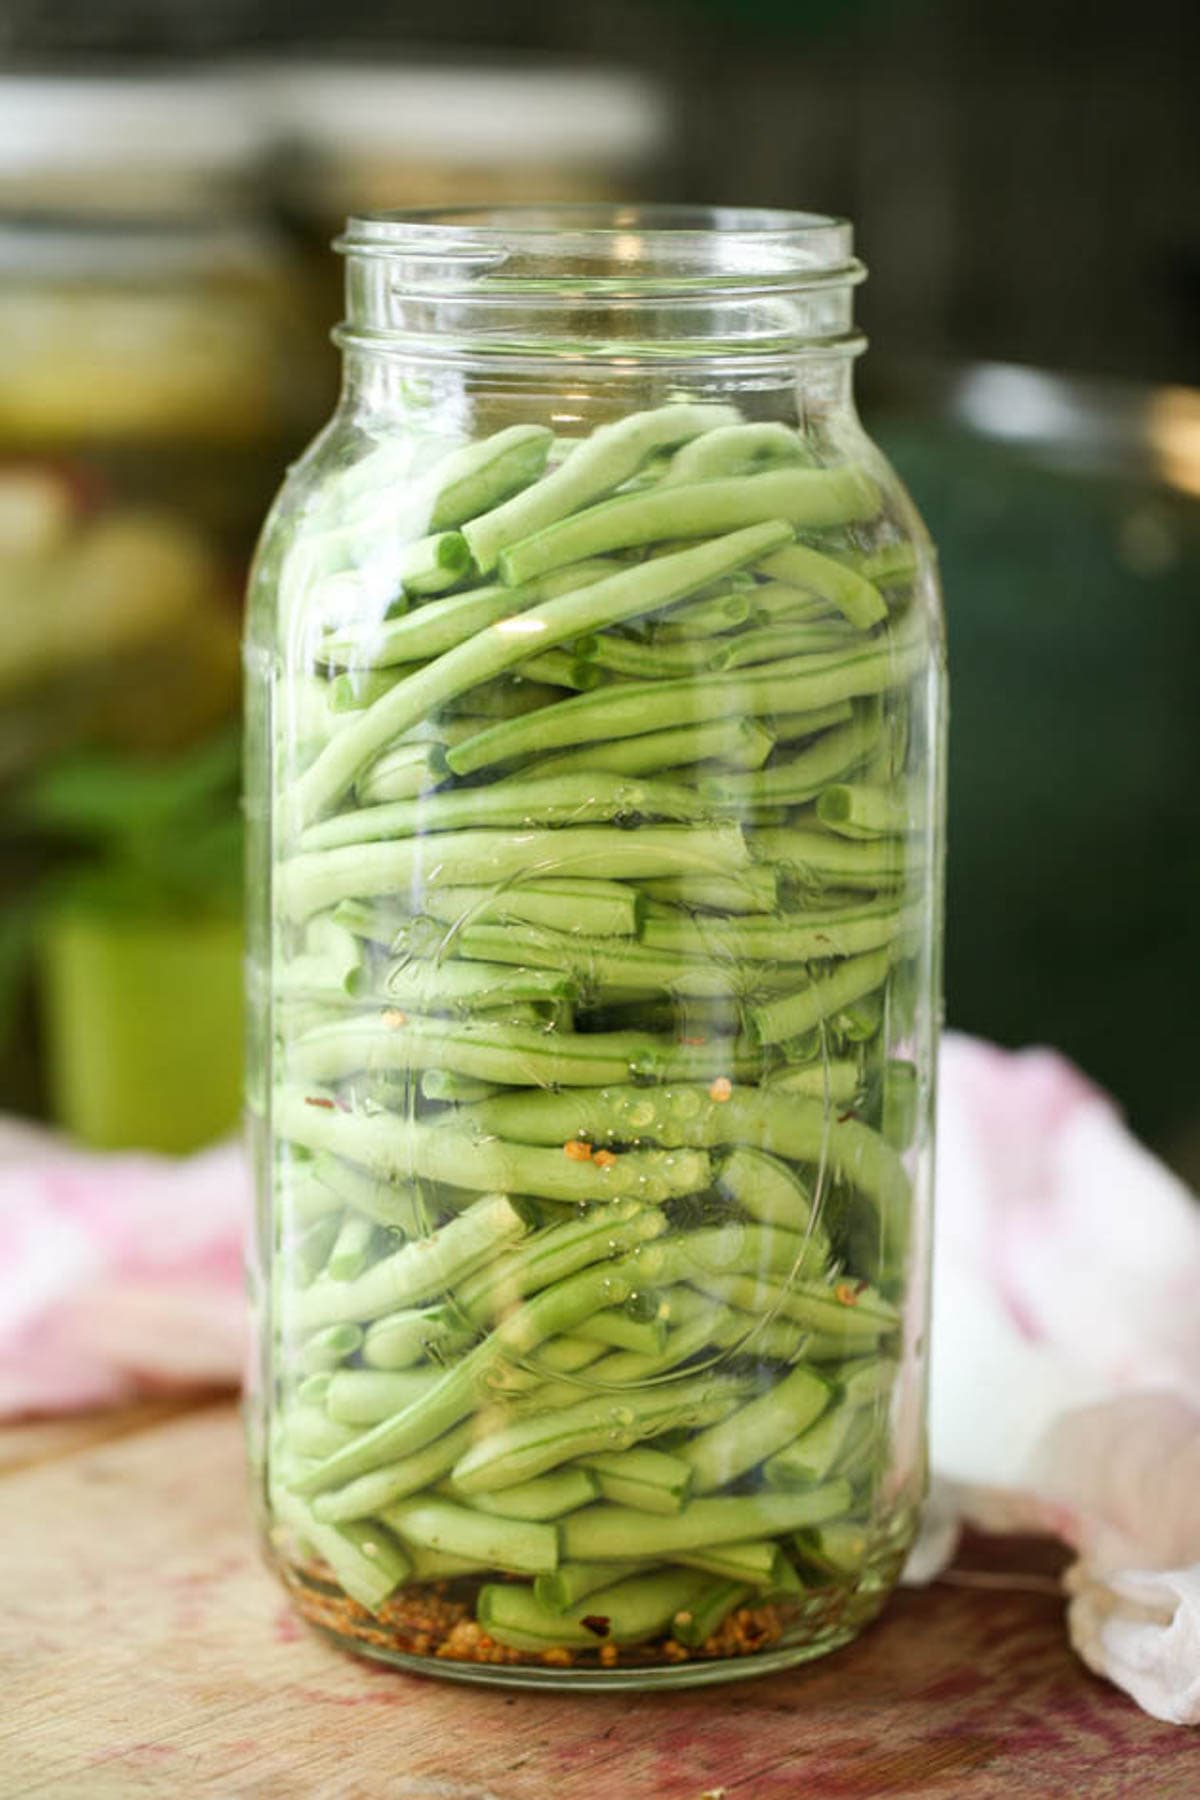 Packing the jar with green beans.